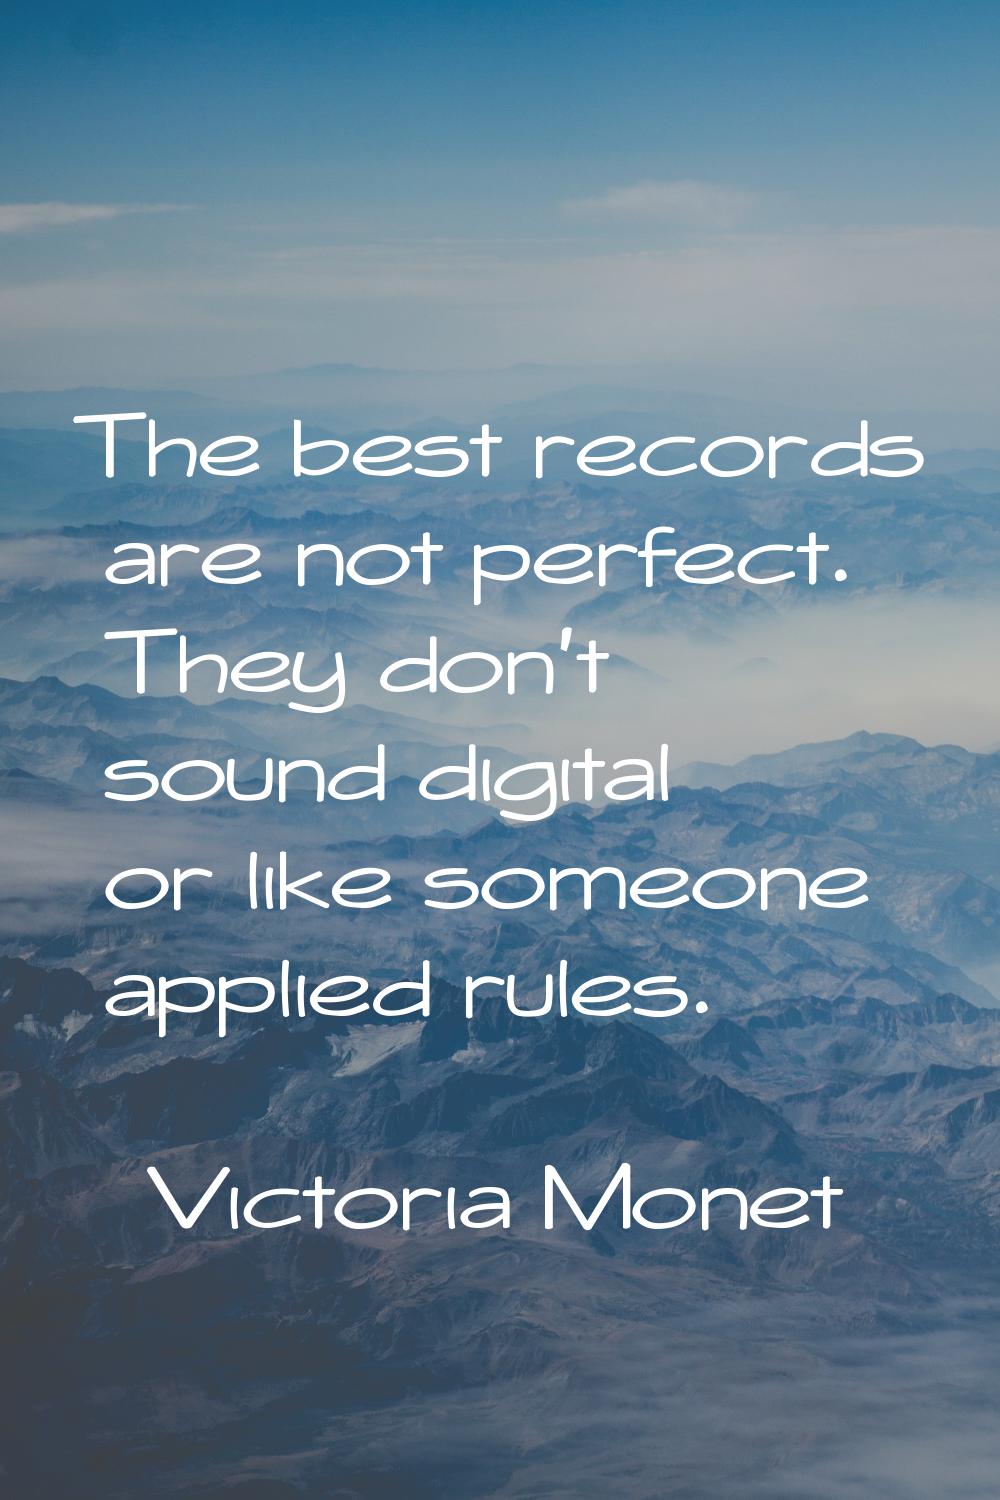 The best records are not perfect. They don't sound digital or like someone applied rules.